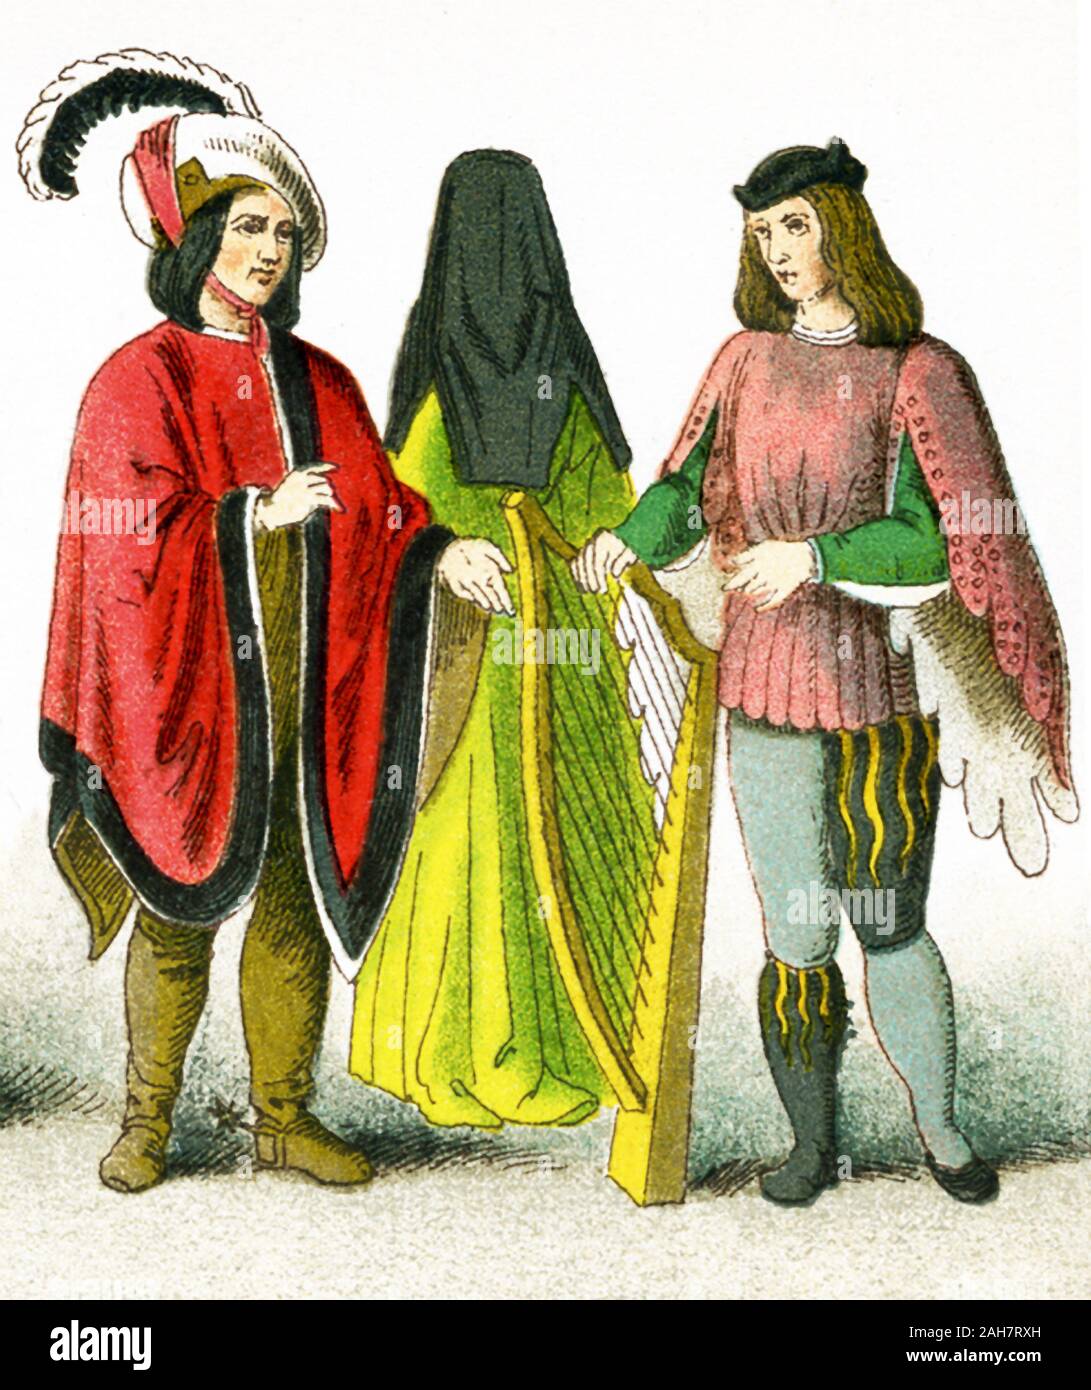 The image shows British costume between 1450 and 1500. The figures represent, from left to right: a male citizen, a female citizen, and a minstrel. The illustration dates to 1882. Stock Photo